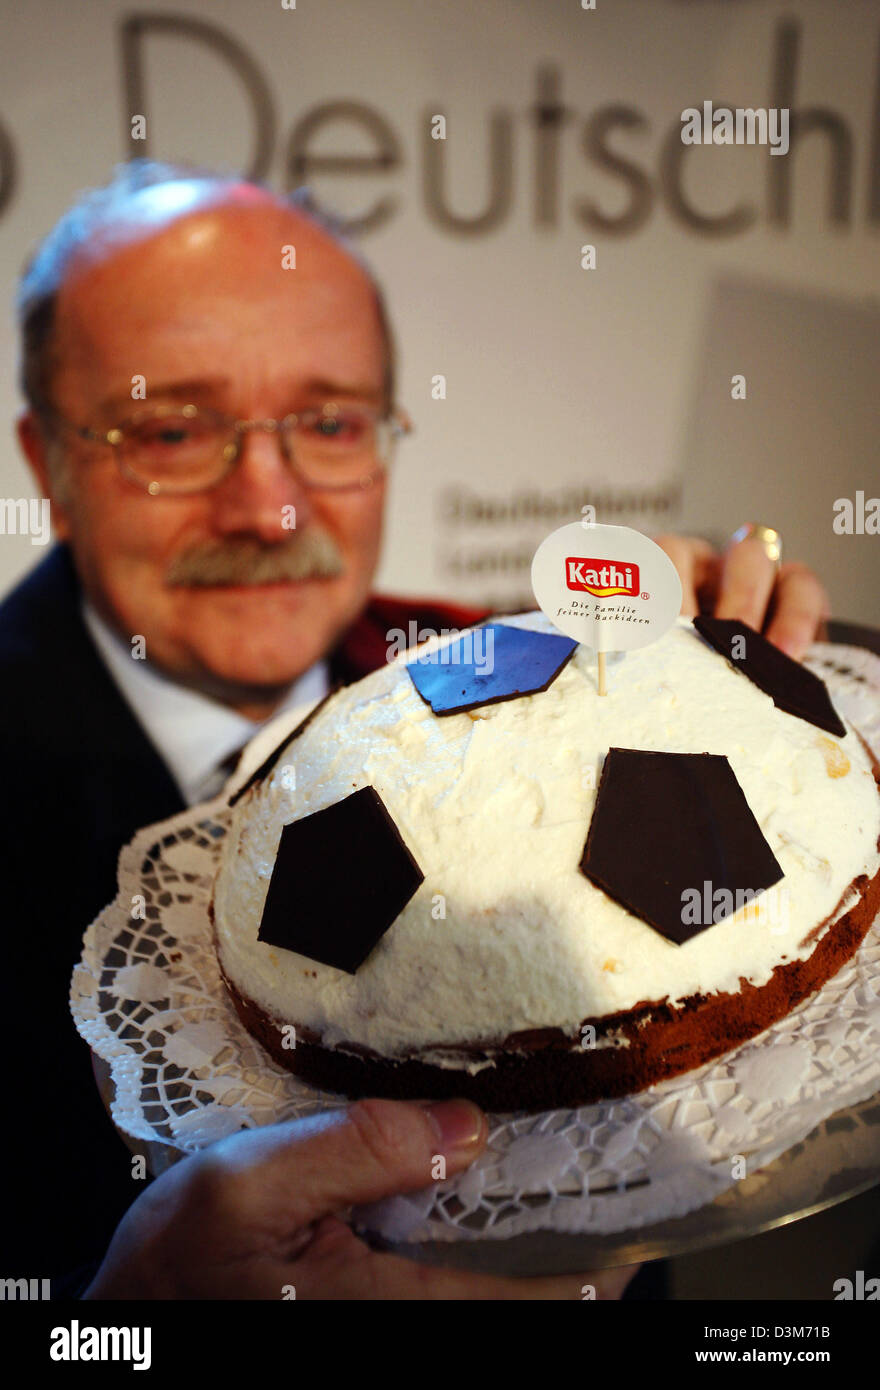 (dpa) - Rainer Thiele, manager of food producer Kathi, presents a 'soccer cake' in Leipzig, Germany, 08 December 2005. It is Germany's only soccer cake which customers can bake themselves, according to Thiele. About 4,000 guests, among them 1,500 journalists, are expected for the FIFA World Cup 2006 main draw in Leipzig on Friday 09 December. Photo: Michael Hanschke Stock Photo